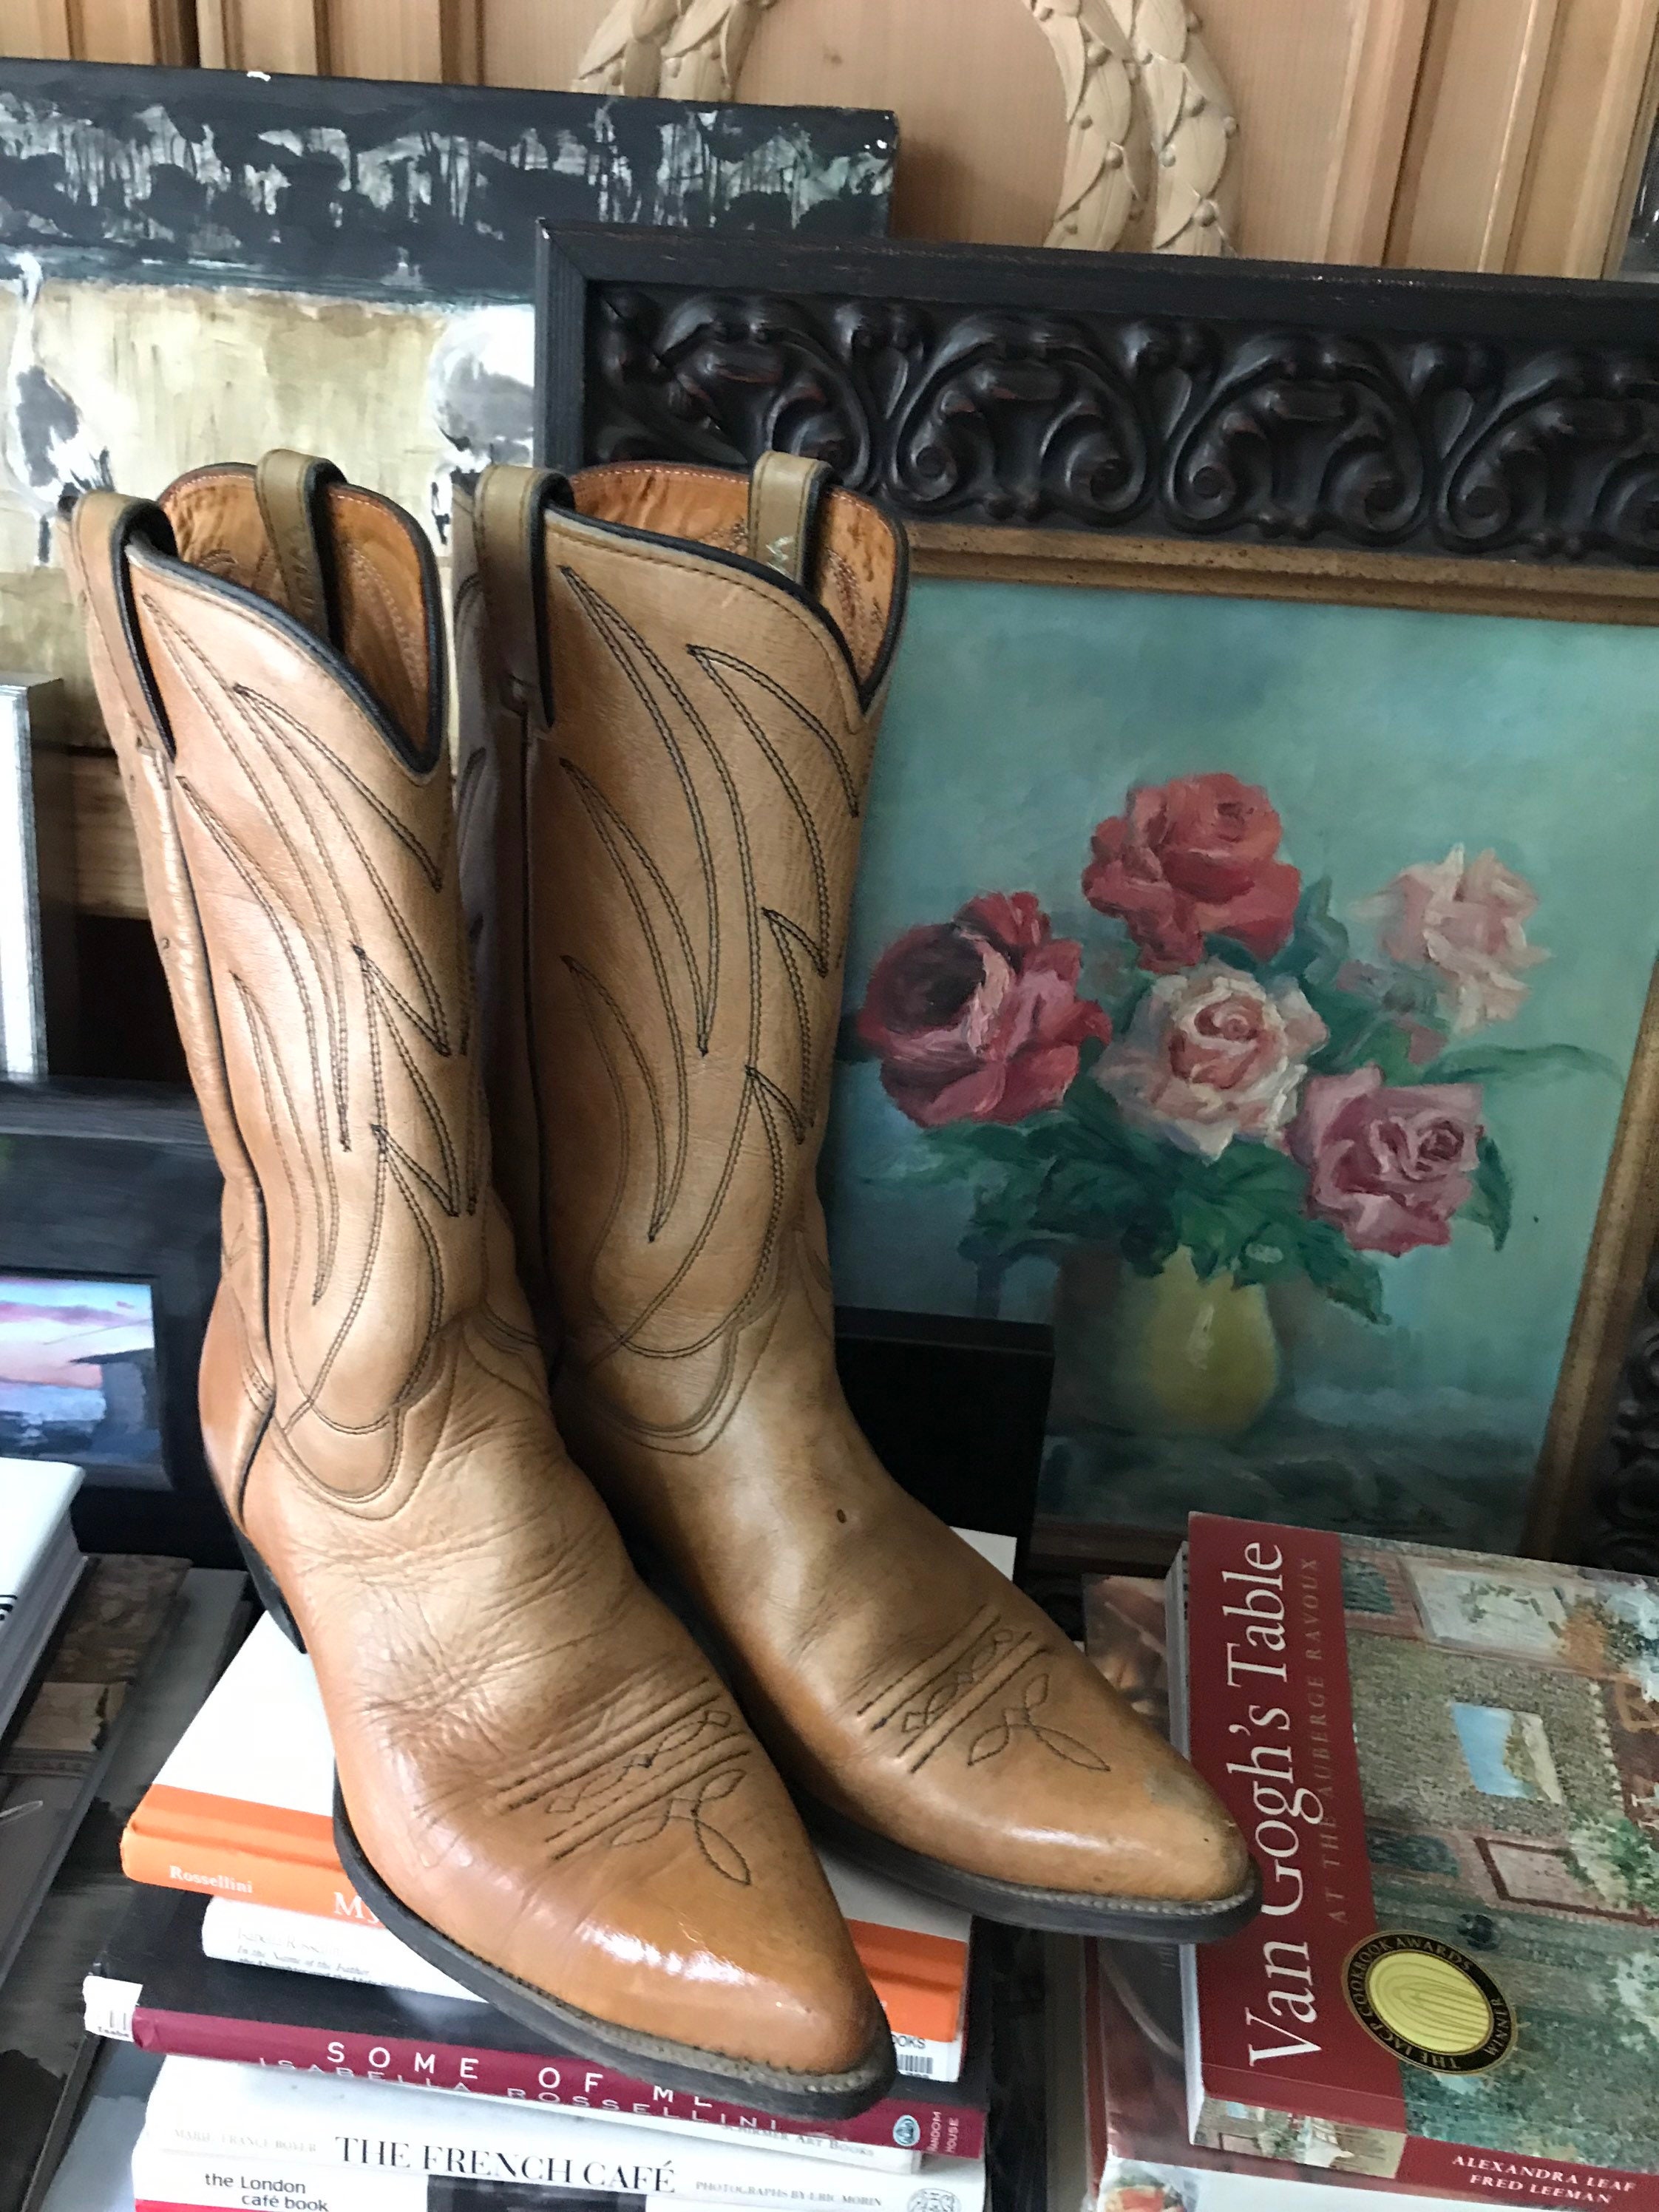 Buy Wrangler USA Cowboy Boots 11 D Worn on Sale Online in - Etsy